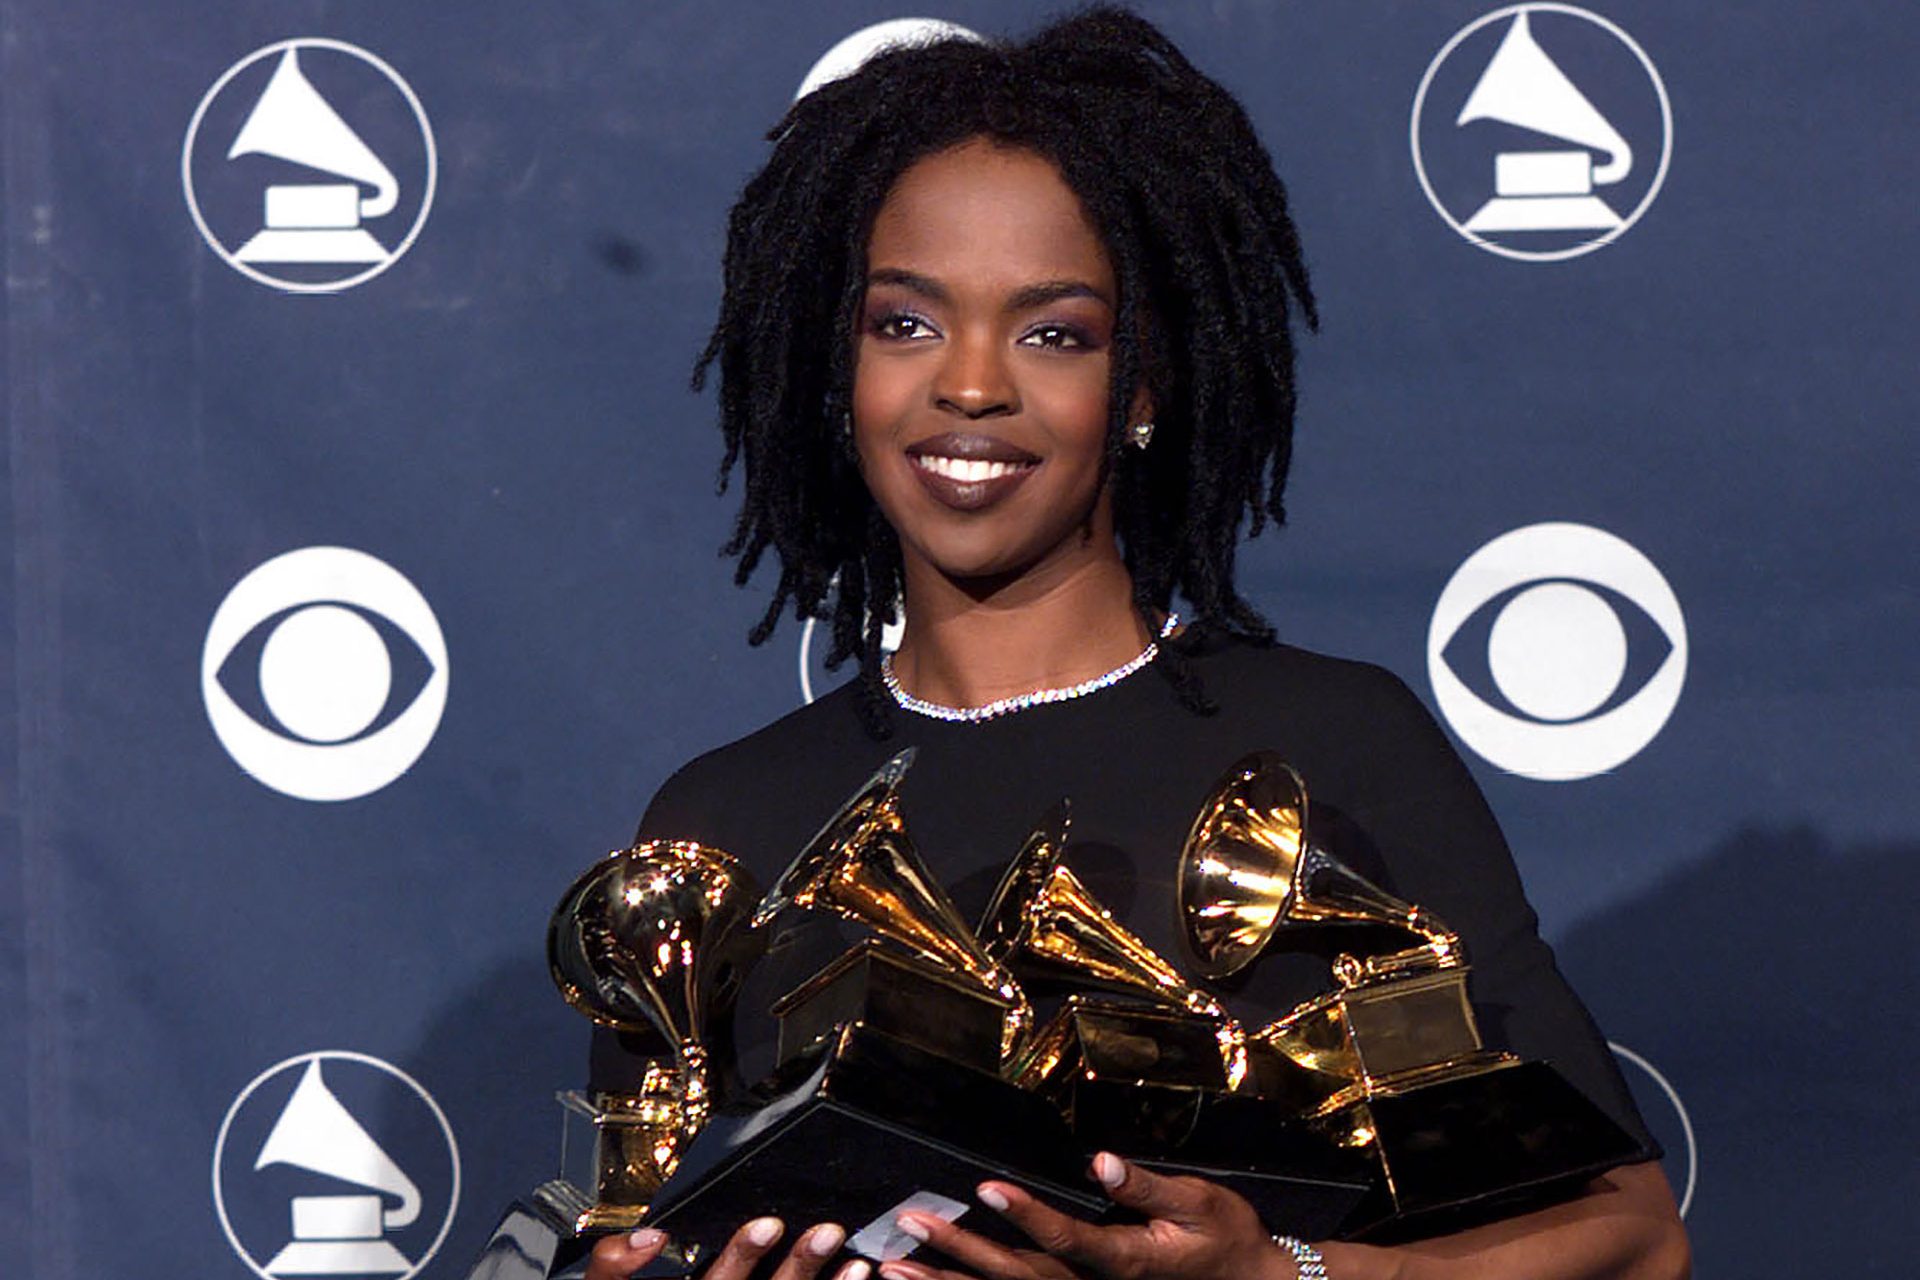 <p>'The Miseducation of Lauryn Hill' was nominated for 11 Grammy Awards and ultimately won five, including 'Album of the Year', while its first single, 'Doo Wop (That Thing)' bagged two: 'Best R&B Song' and 'Best Female R&B Vocal Performance'.</p>